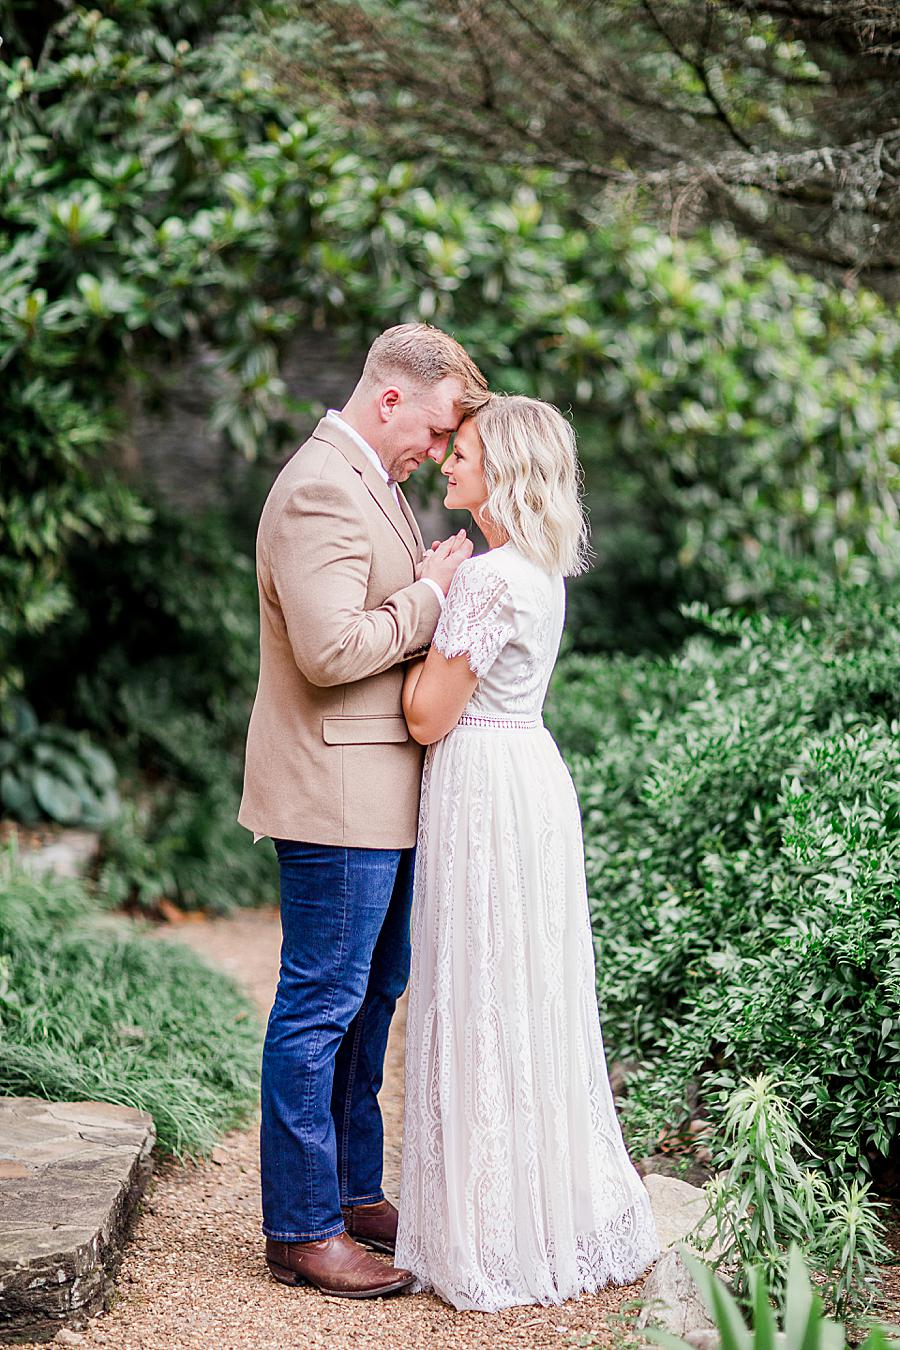 In love by Knoxville Wedding Photographer, Amanda May Photos.